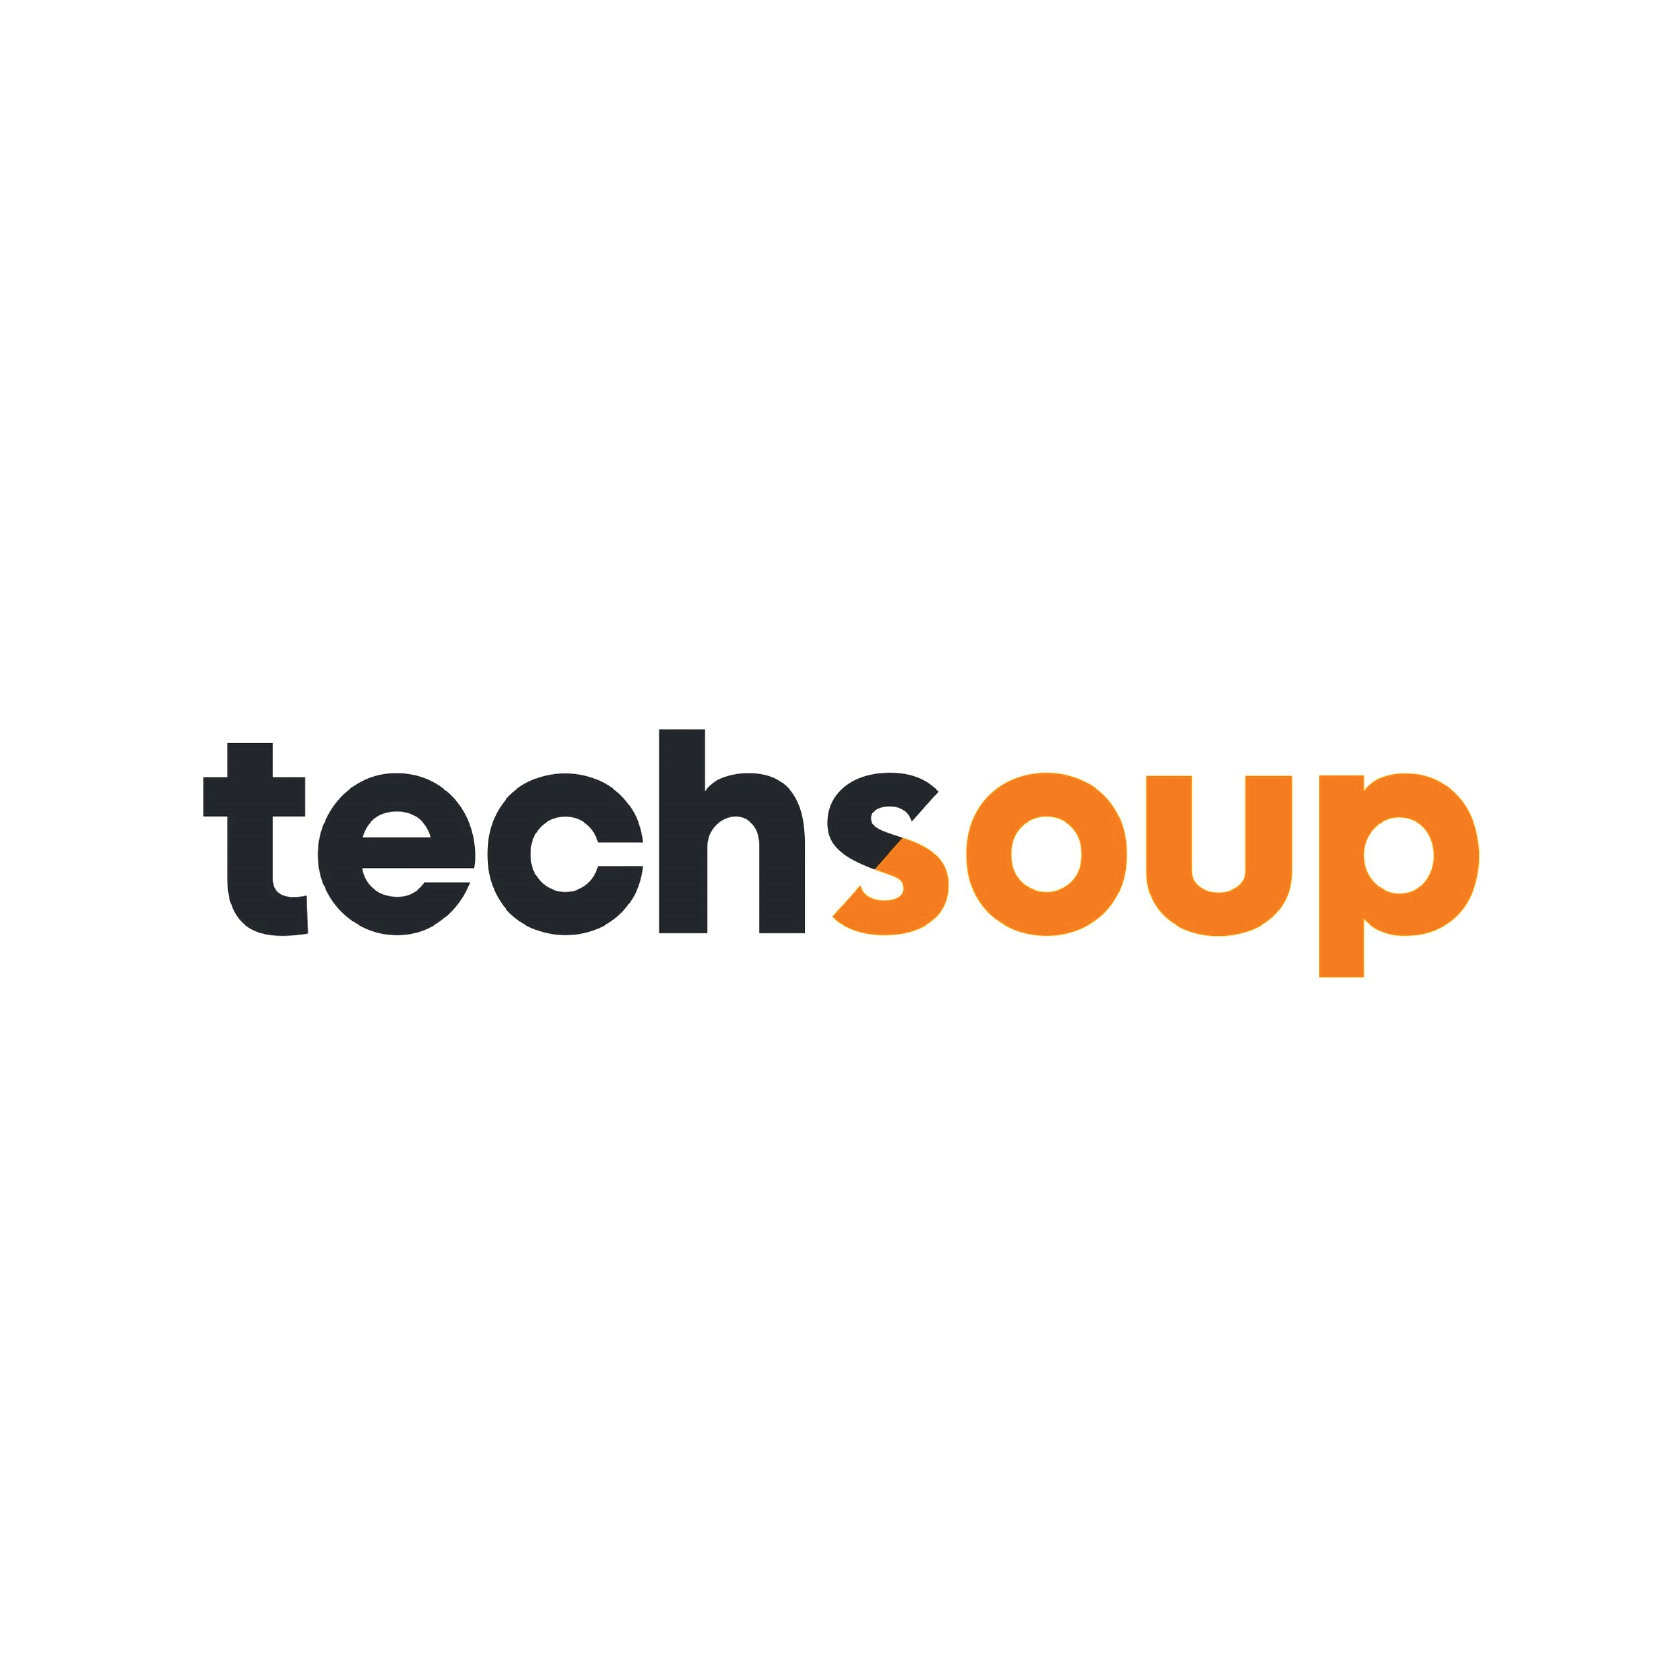 techsoup-01